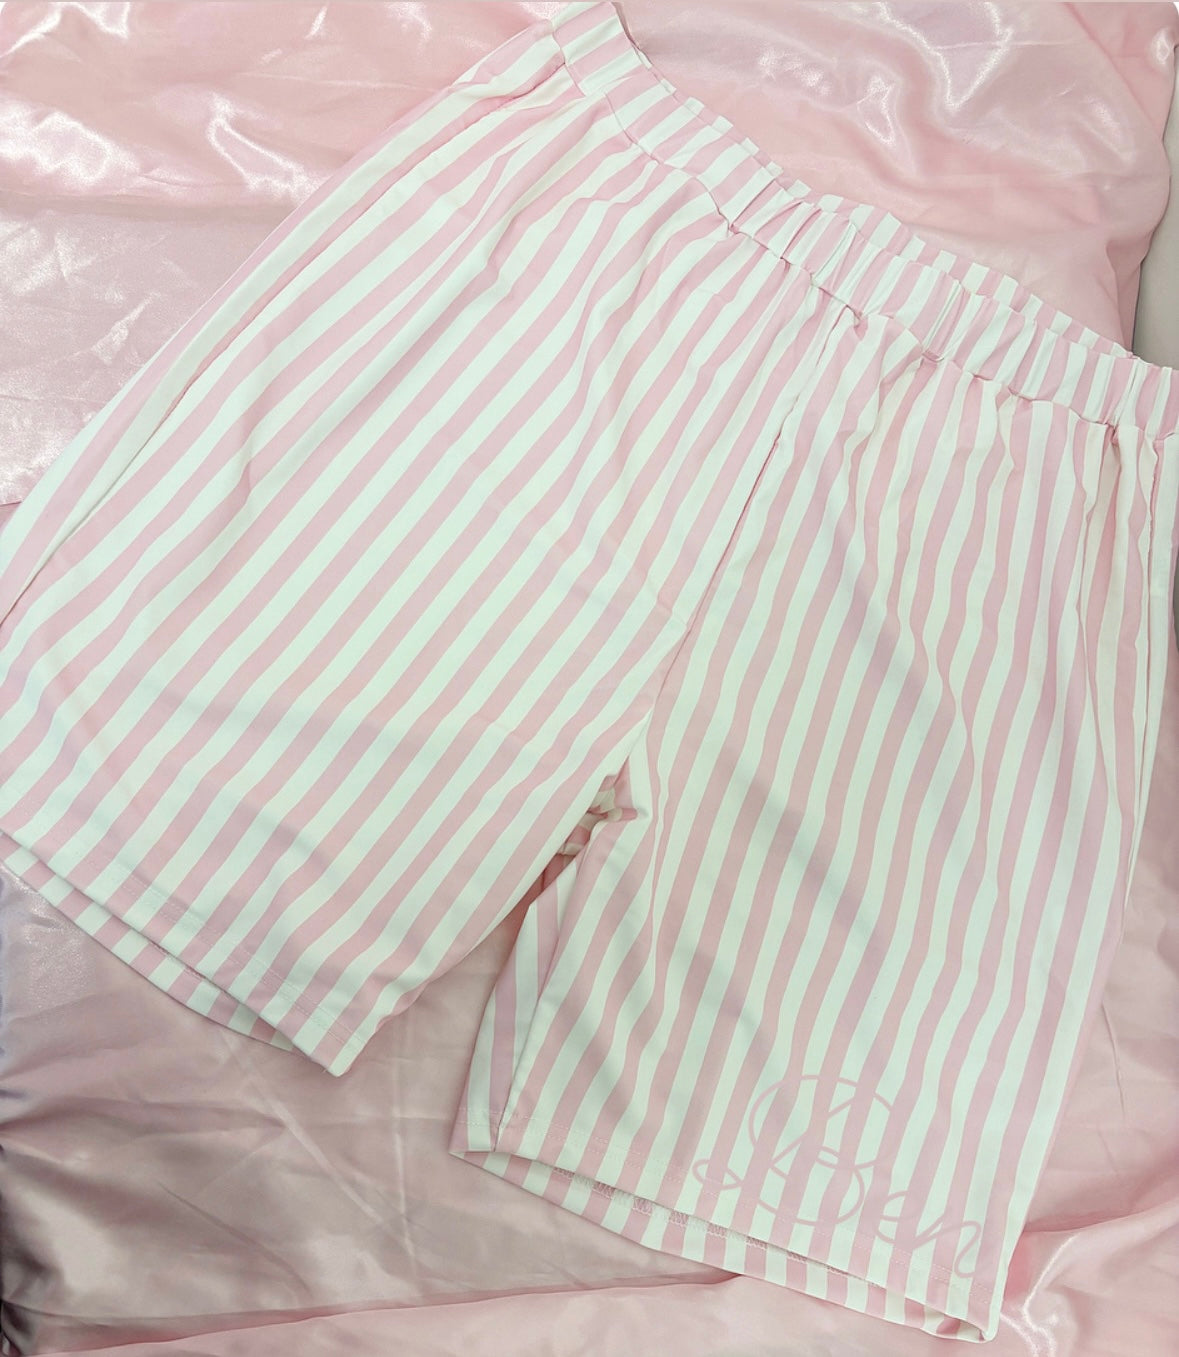 BOYS/MENS PERSONALISED PINK STRIPED SWIMMING SHORTS 2-4 WEEKS